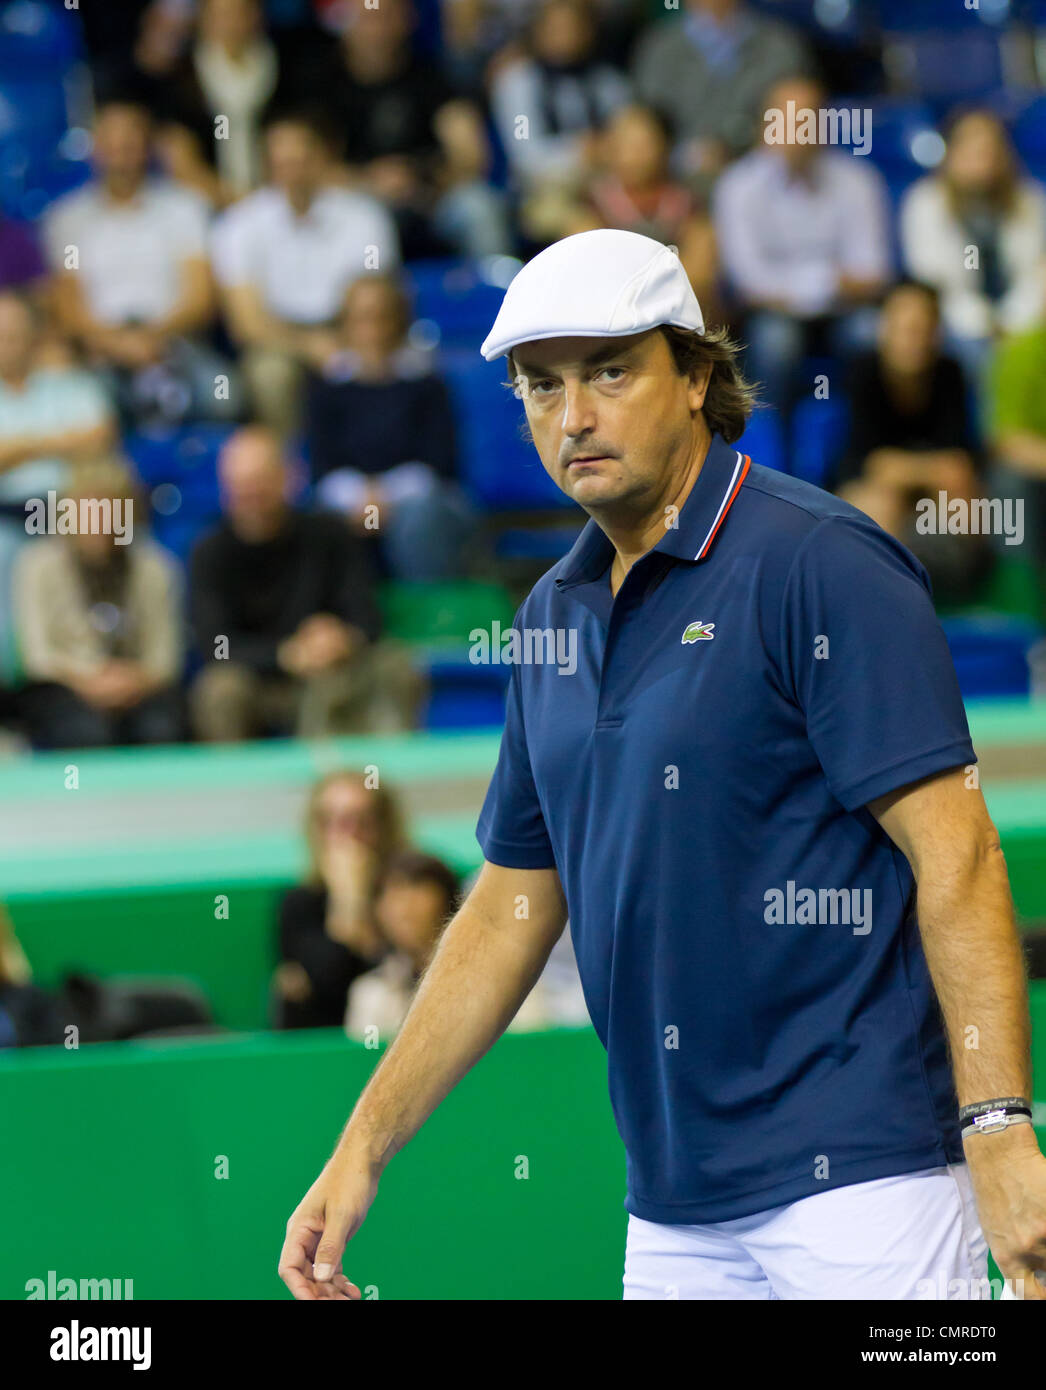 Henri Leconte plays tennis in double final of BNP Paribas Open Champions Tour aganinst Tim Henman in Zurich, SUI Stock Photo